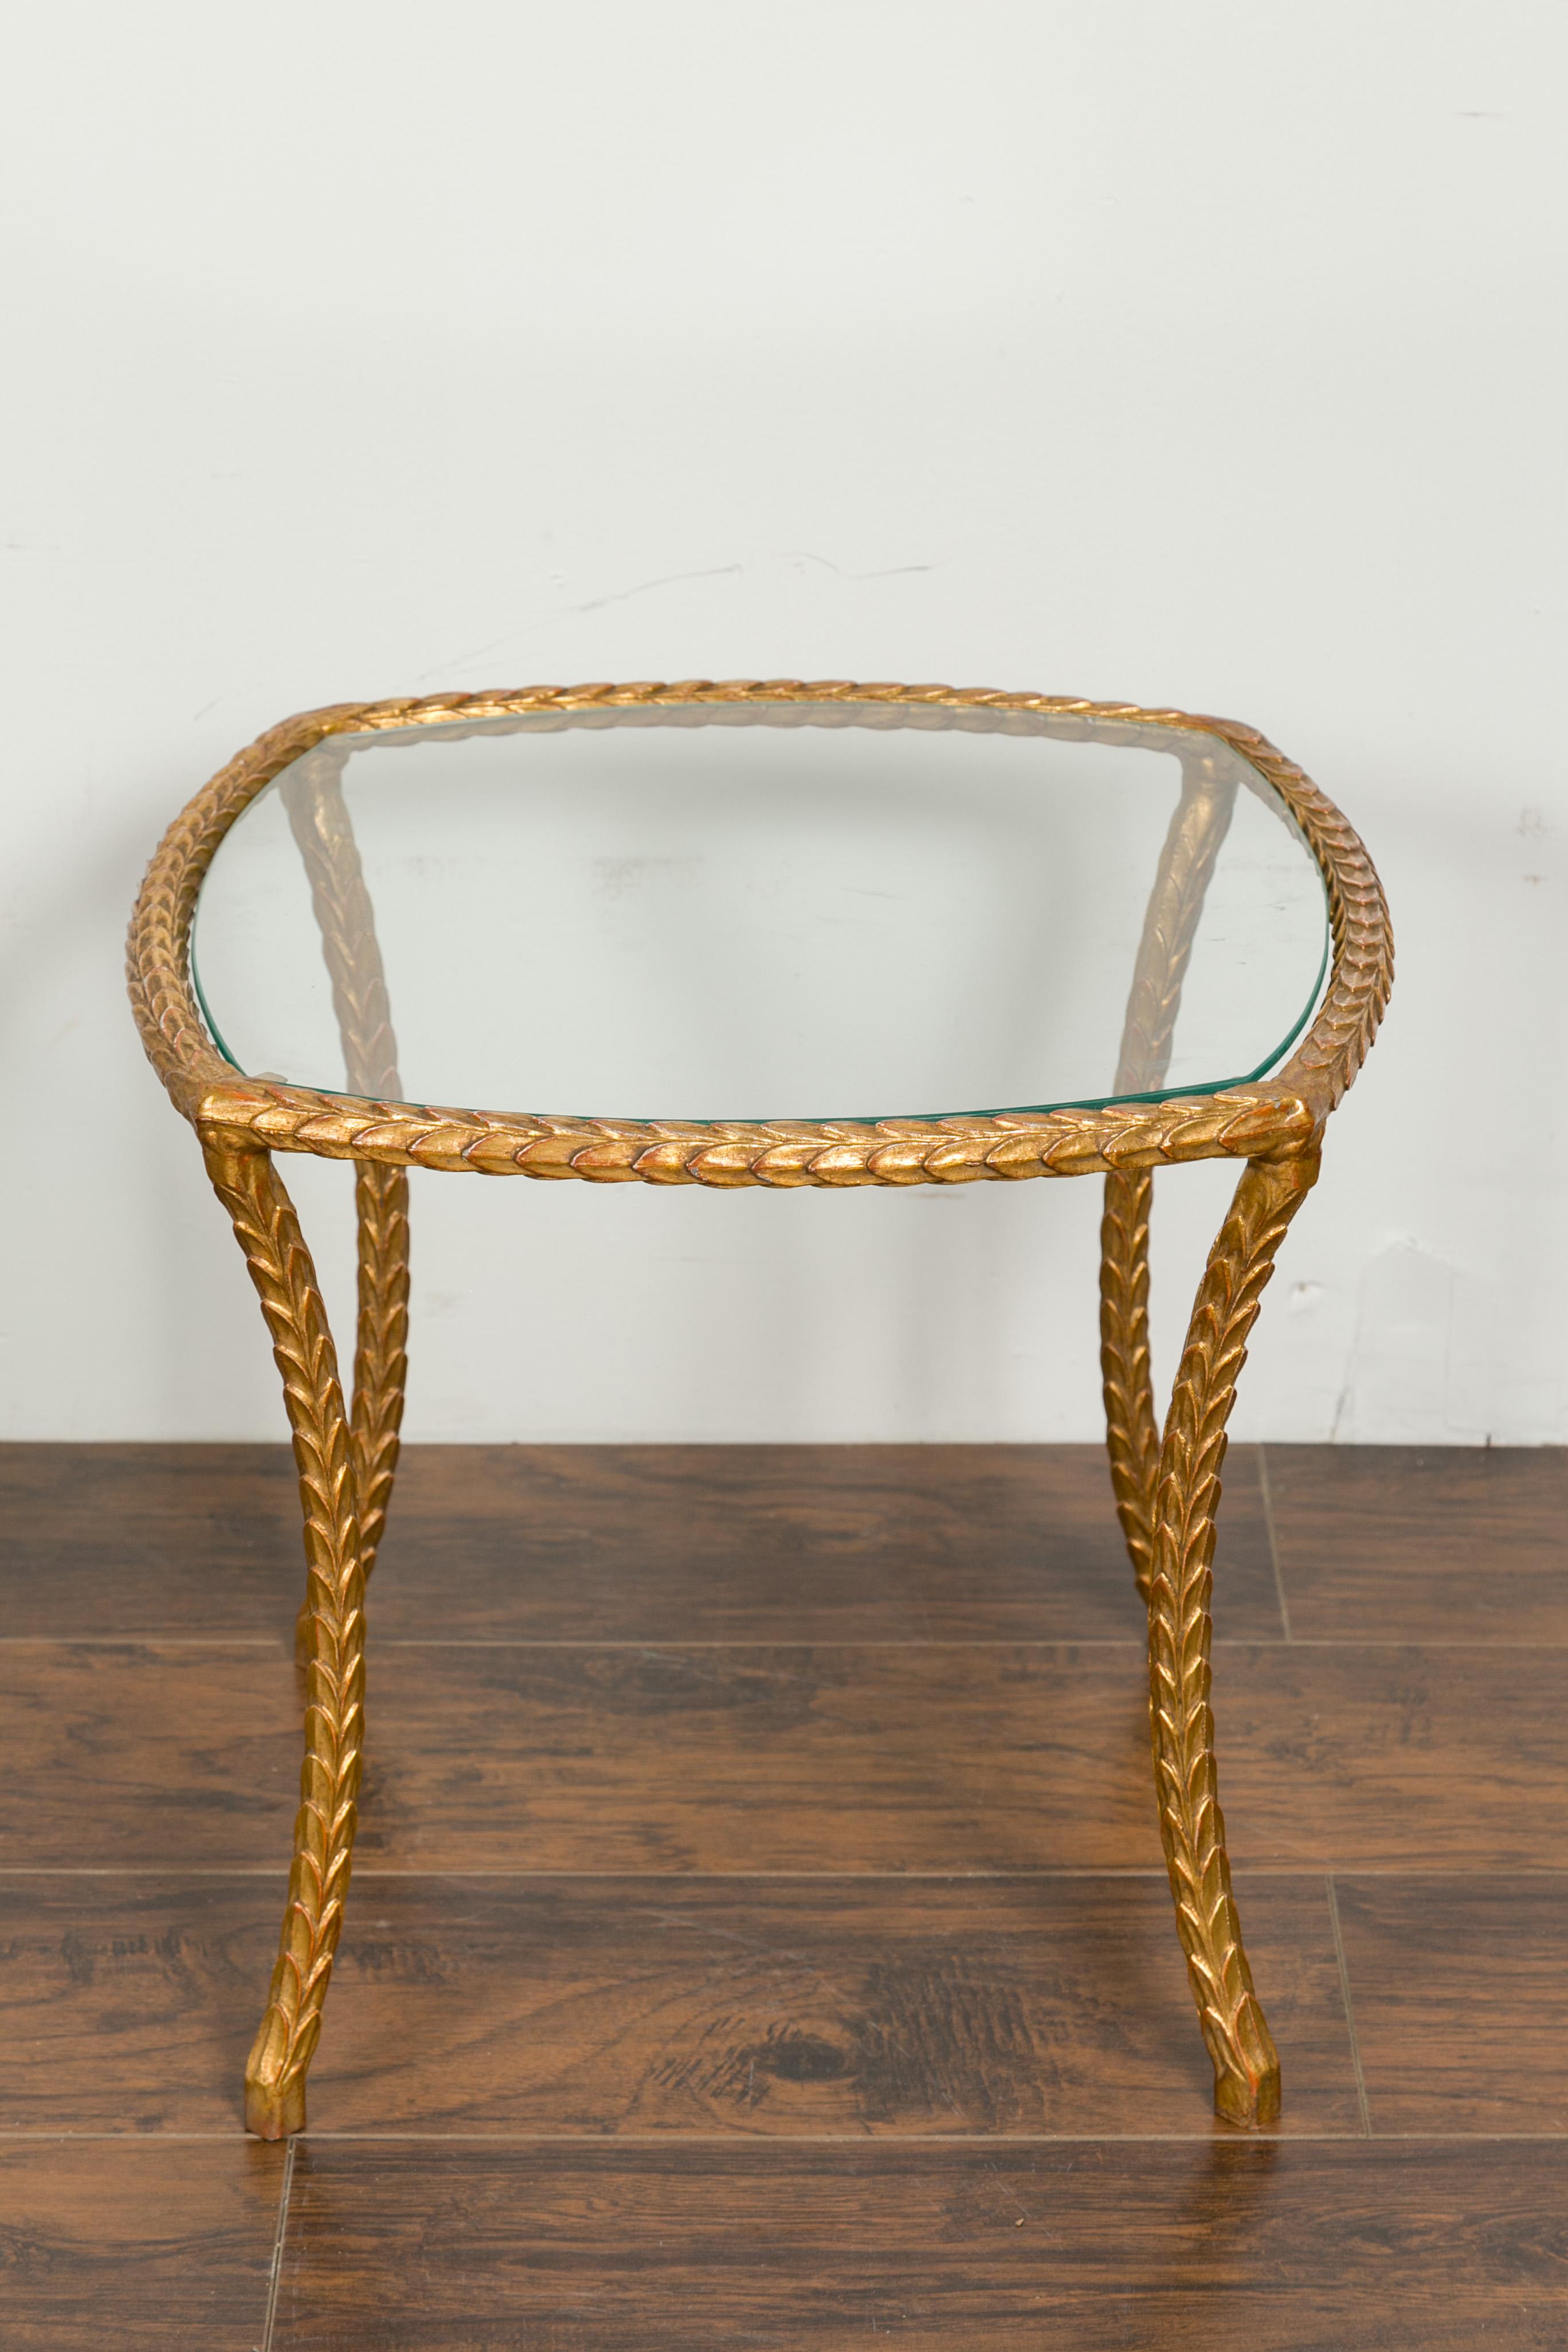 Pair of Midcentury French Maison Baguès Style Gilt Bronze Tables with Glass Tops For Sale 5